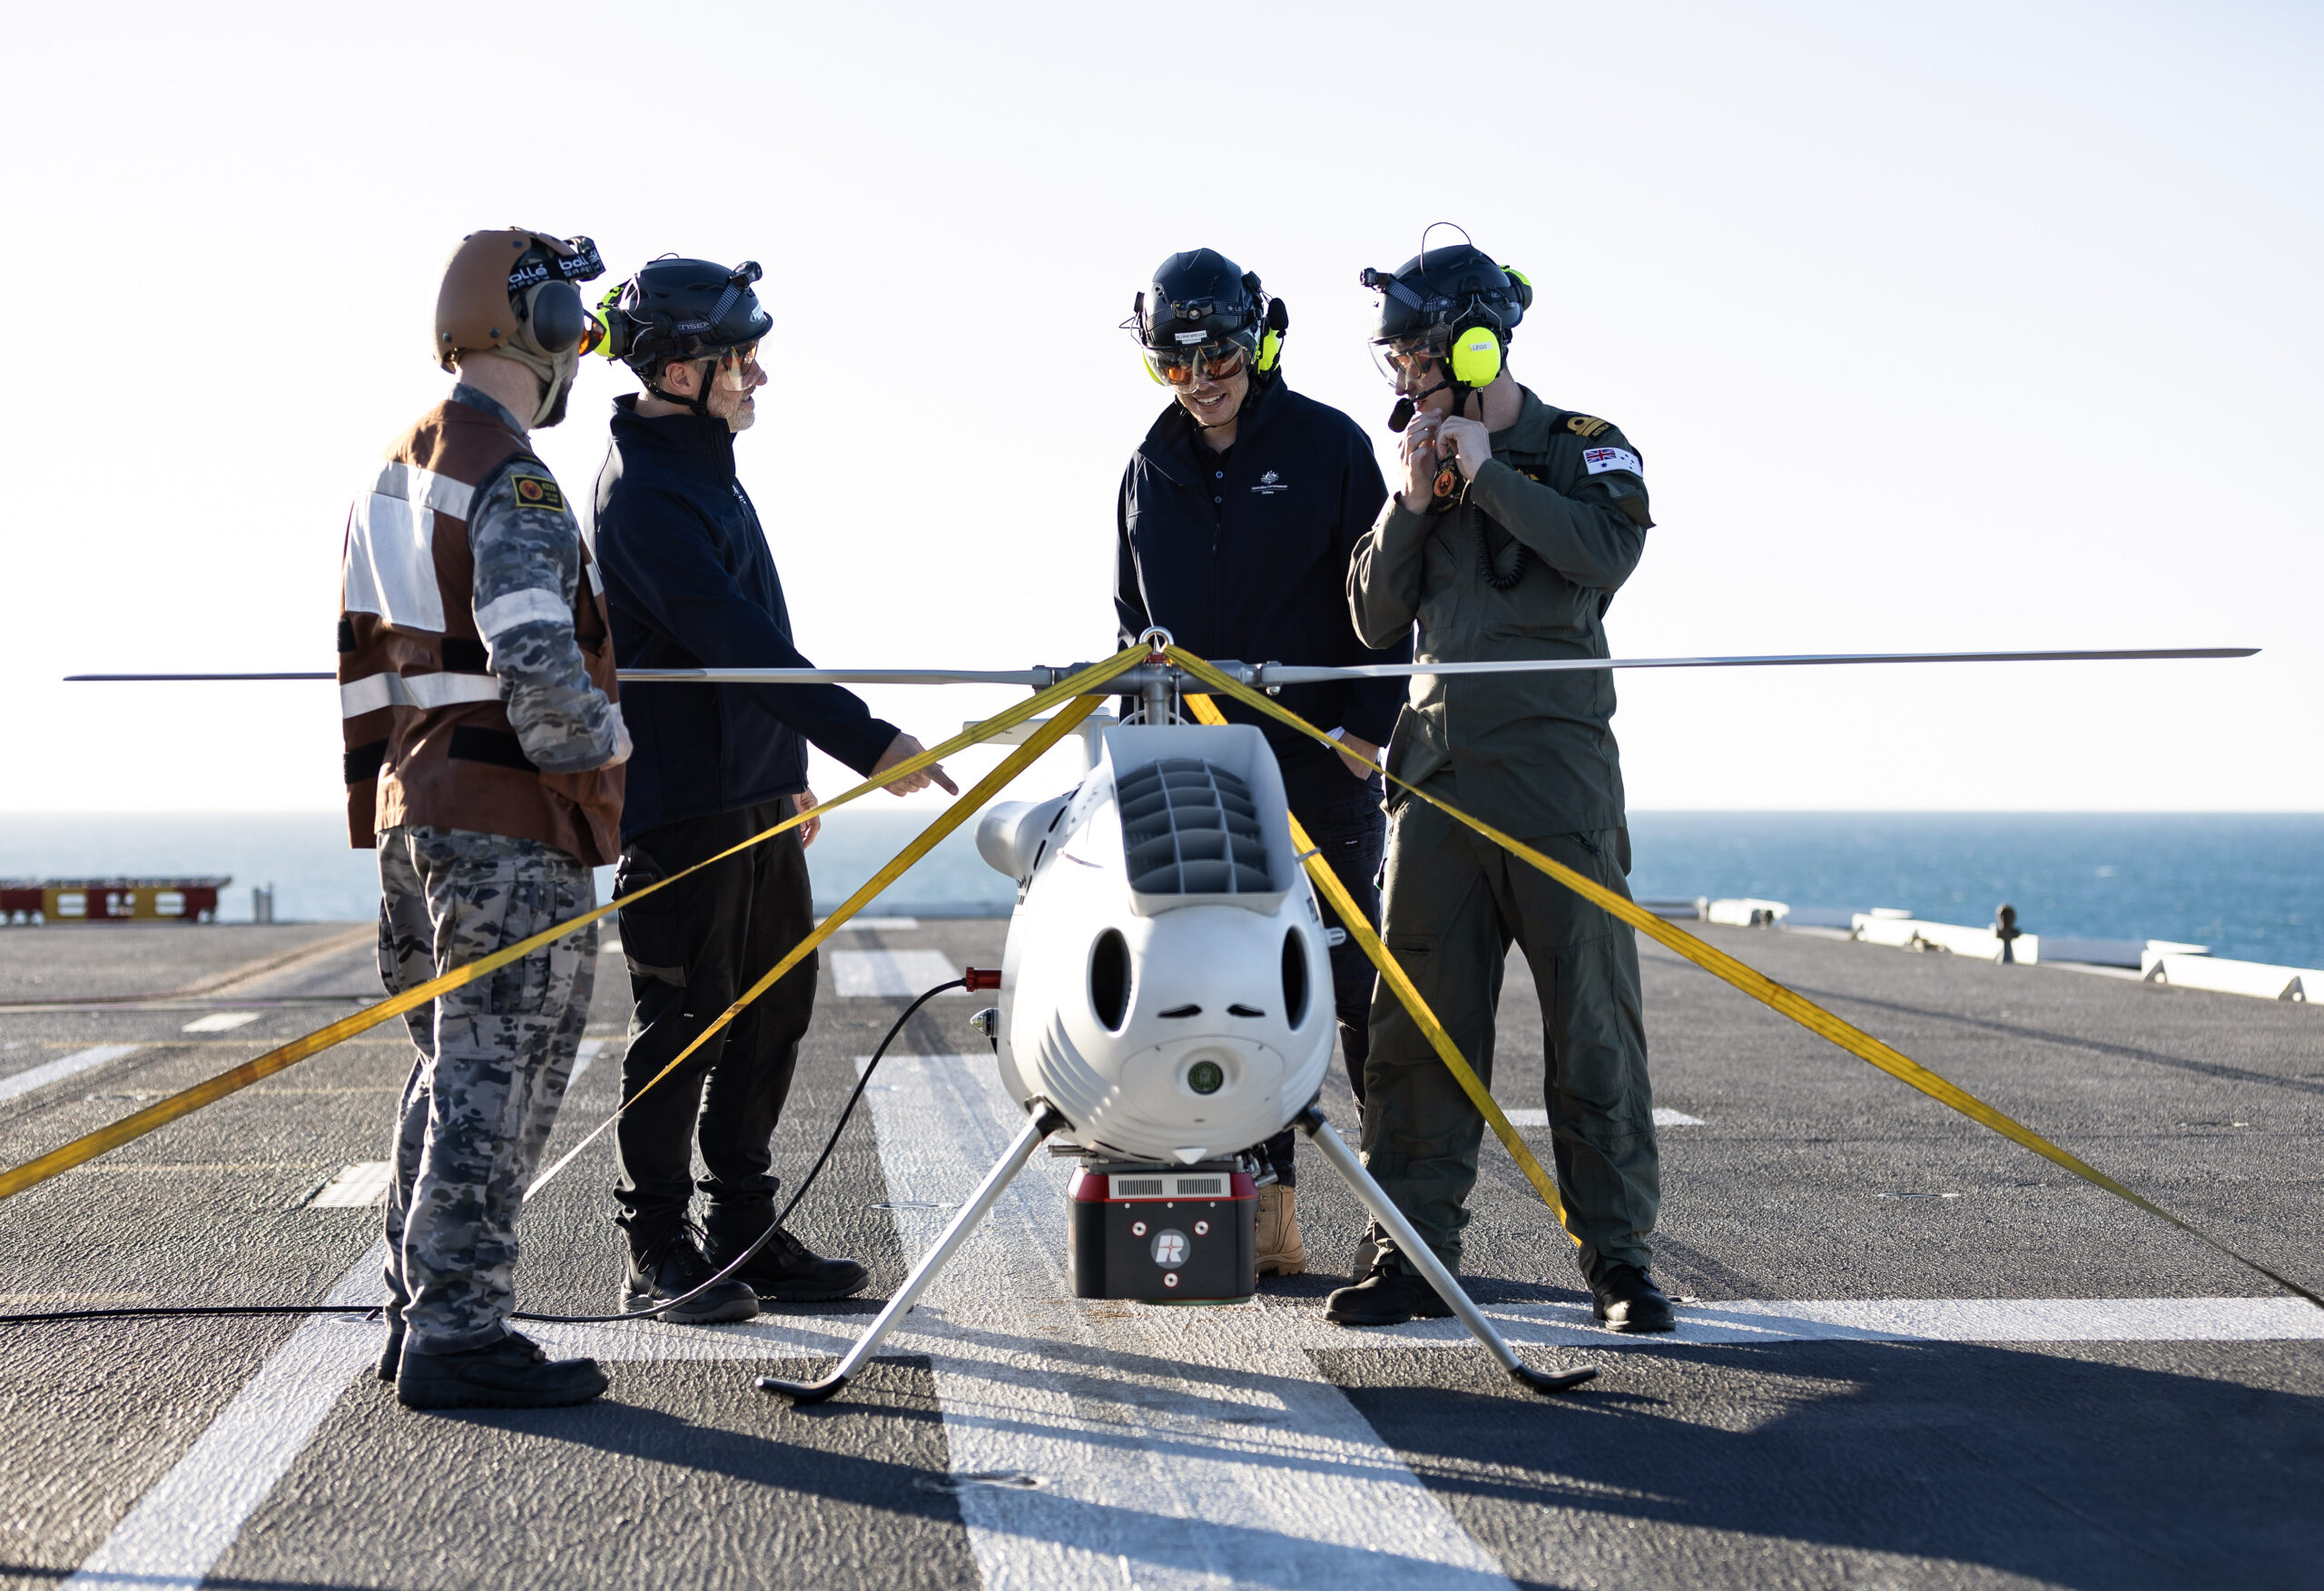 S100 Crew from 822X Squadron and Defence Science and Technology Group personnel discuss the S100 Bathymetric LiDAR Sensor trials on the Flight Deck of HMAS Adelaide during Exercise Sea Raider 23. *** Local Caption *** In July 2023 the Australian Defence Force conducted Exercise Sea Raider across the coast of North Queensland. Exercise Sea Raider certified the Amphibious Ready Unit and saw the Australian Amphibious Force train closely with the Royal Australian Navy's HMAS Adelaide and HMAS Choules, as well as a beach landing force comprising of infantry, armoured vehicles, artillery, aviation and logistic elements optimised for amphibious raids and assaults. The Sea Series of exercises enhances joint interoperability of the Australian Army and Royal Australian Navys amphibious capabilities.